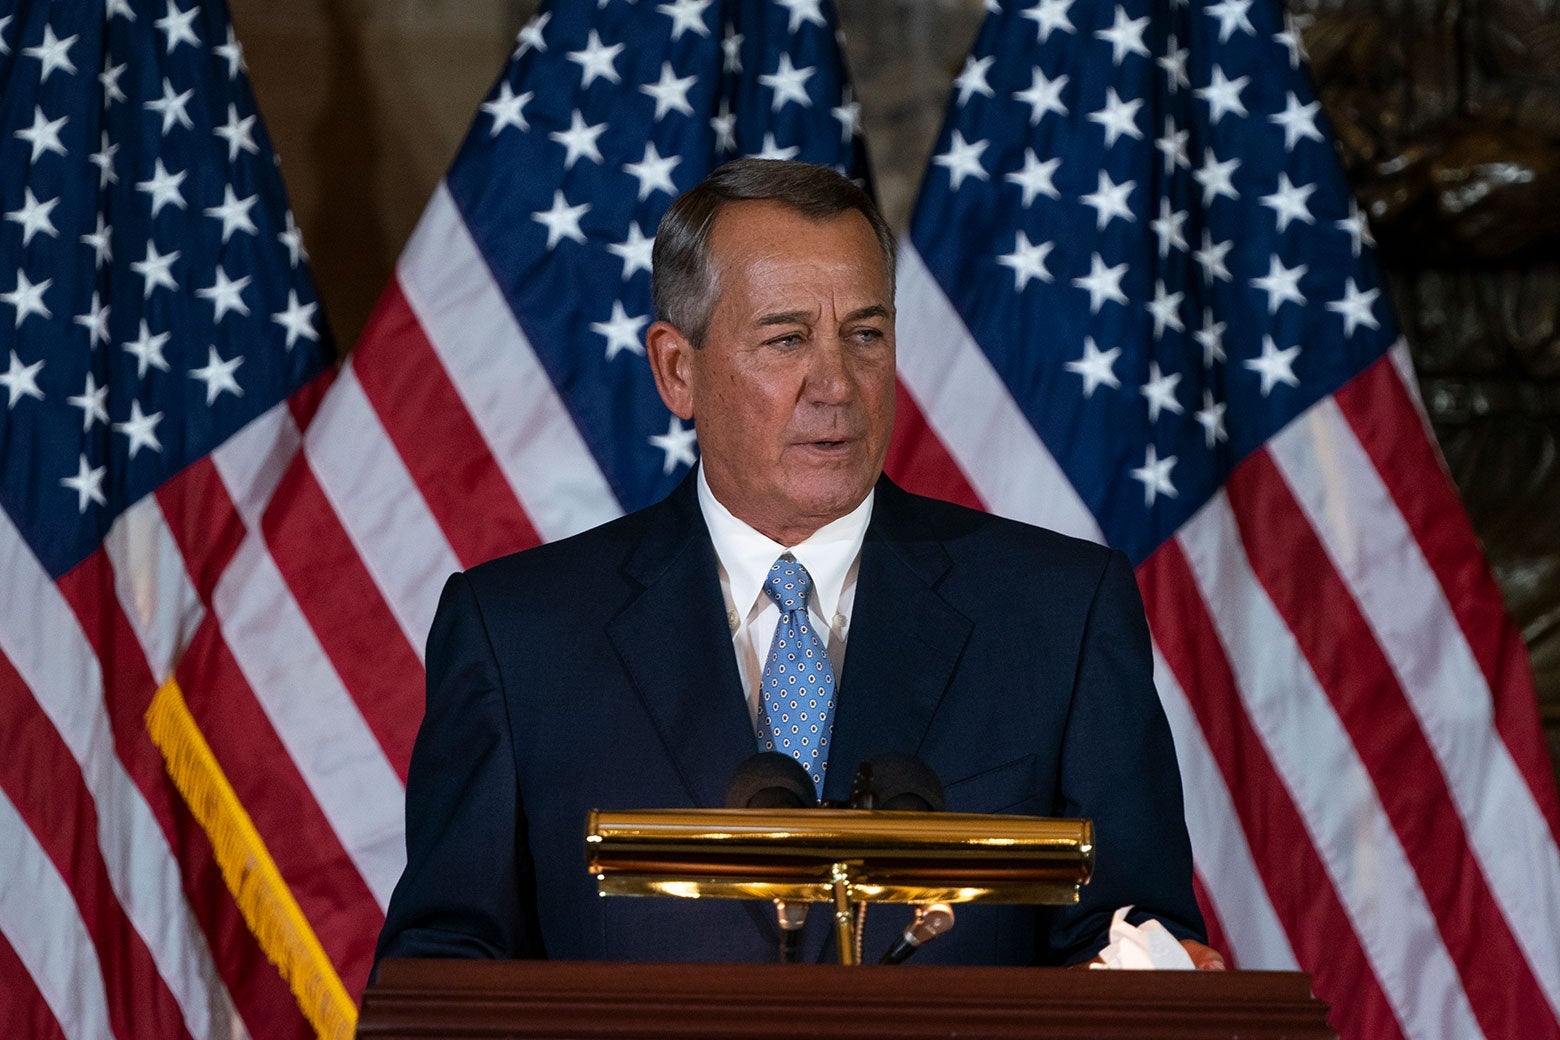 Boehner speaks at a podium with American flags behind him